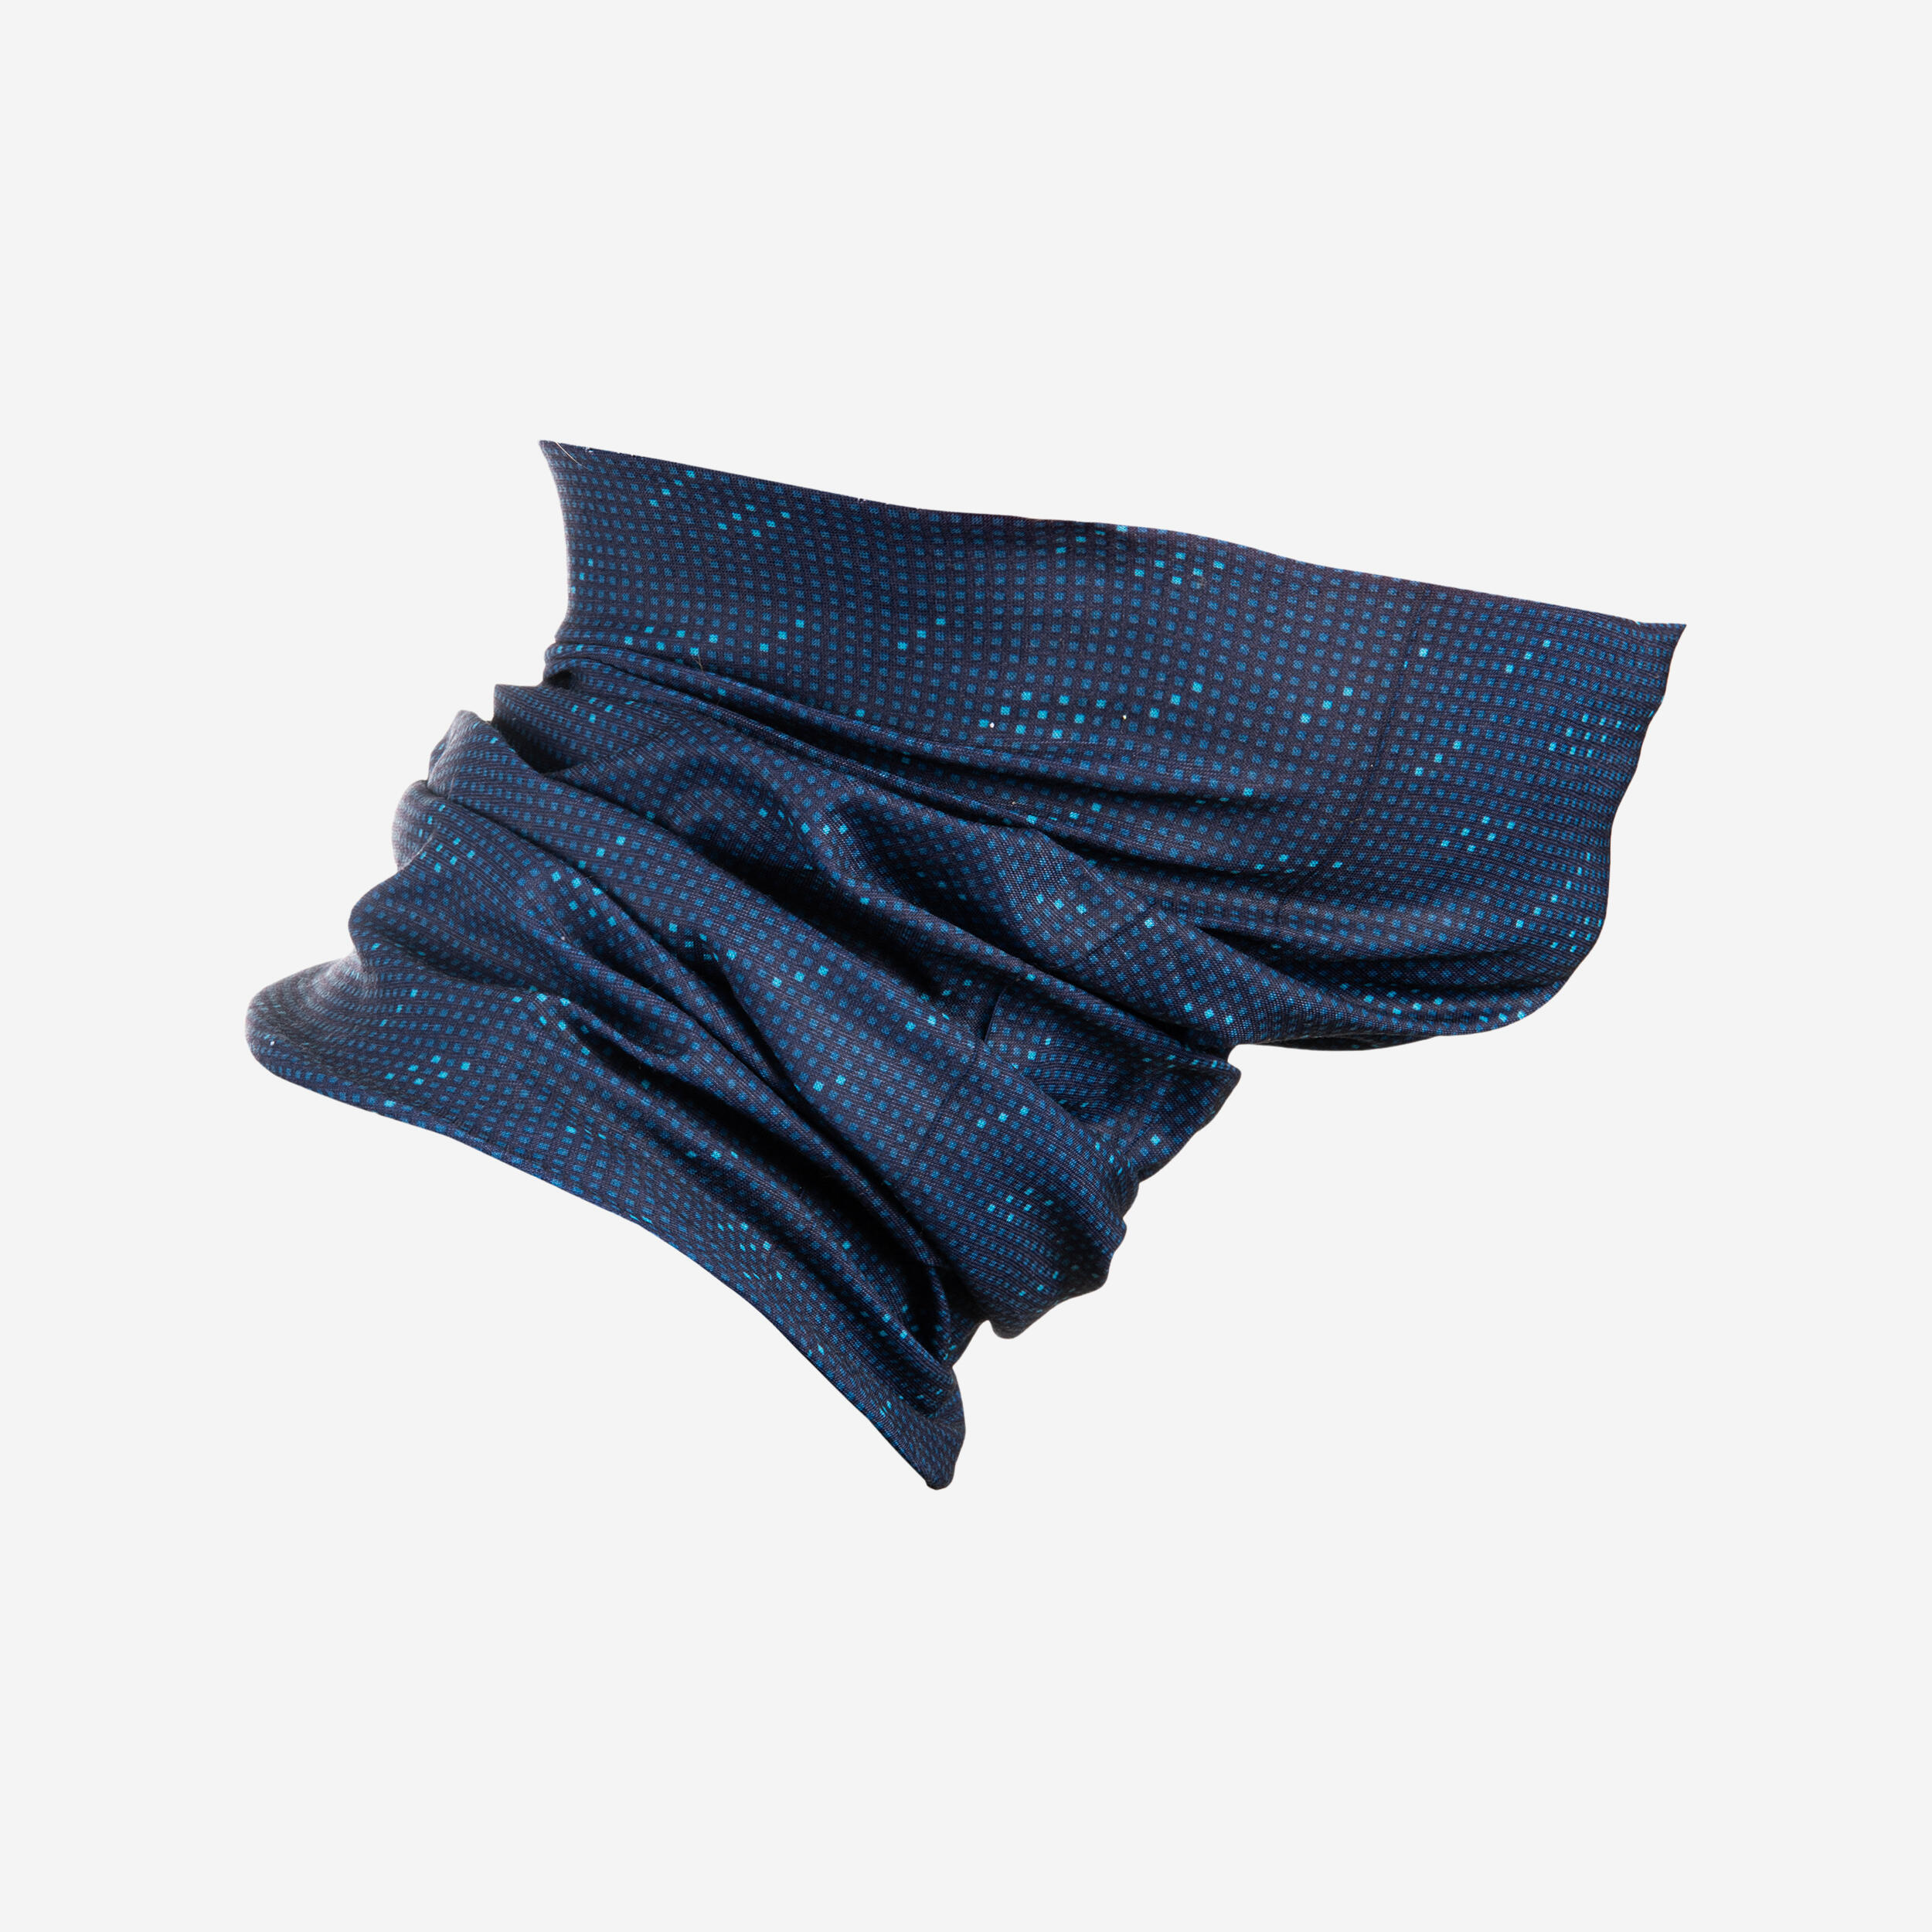 Cycling Neck Warmer RoadR 100 - Navy Blue - ONE SIZE FITS ALL By VAN RYSEL | Decathlon